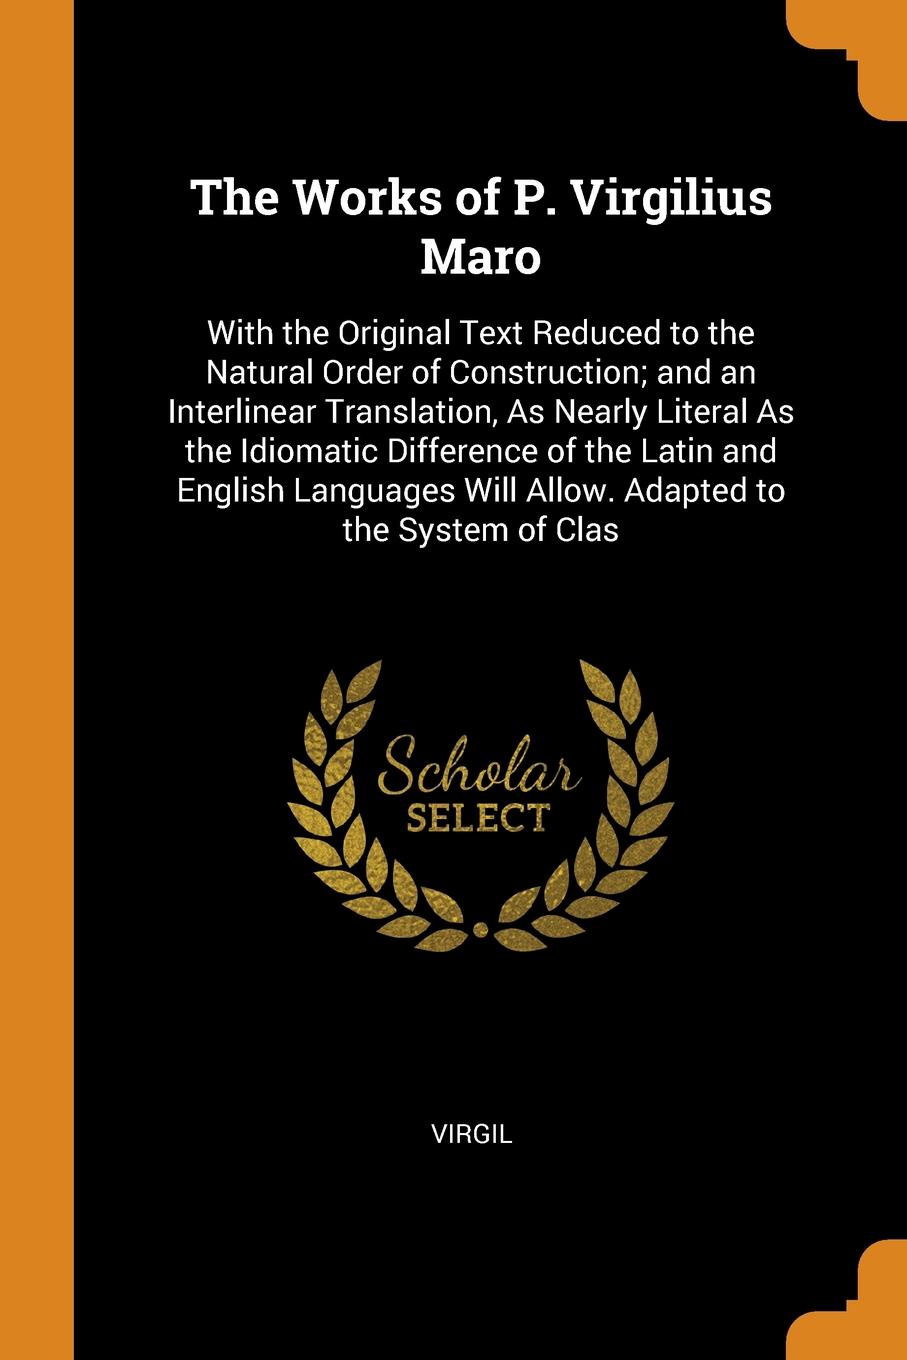 The Works of P. Virgilius Maro. With the Original Text Reduced to the Natural Order of Construction; and an Interlinear Translation, As Nearly Literal As the Idiomatic Difference of the Latin and English Languages Will Allow. Adapted to the System...